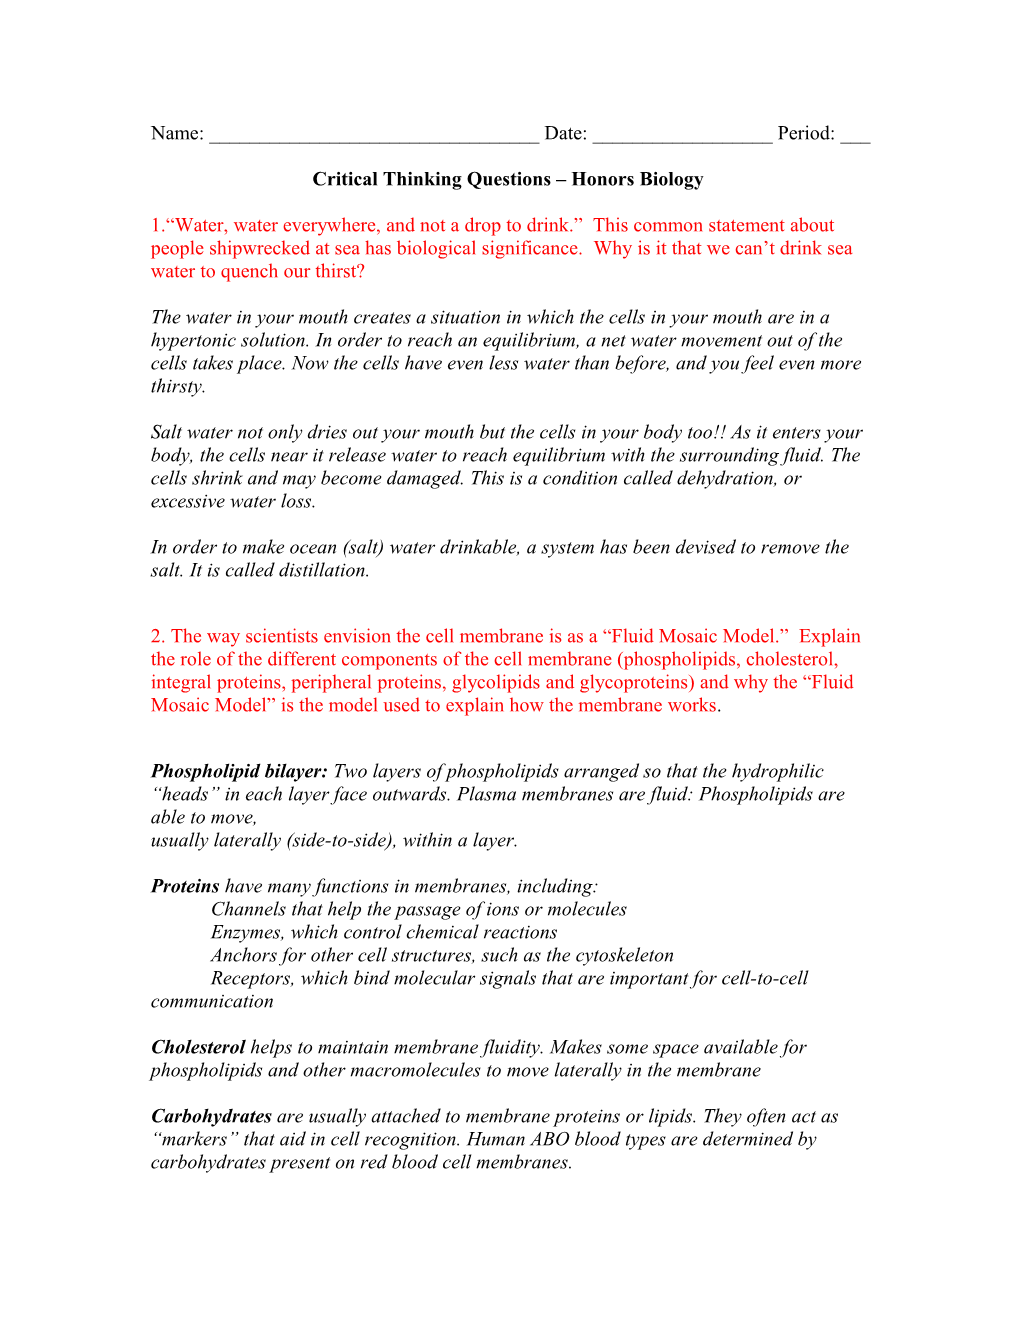 Critical Thinking Questions Honors Biology